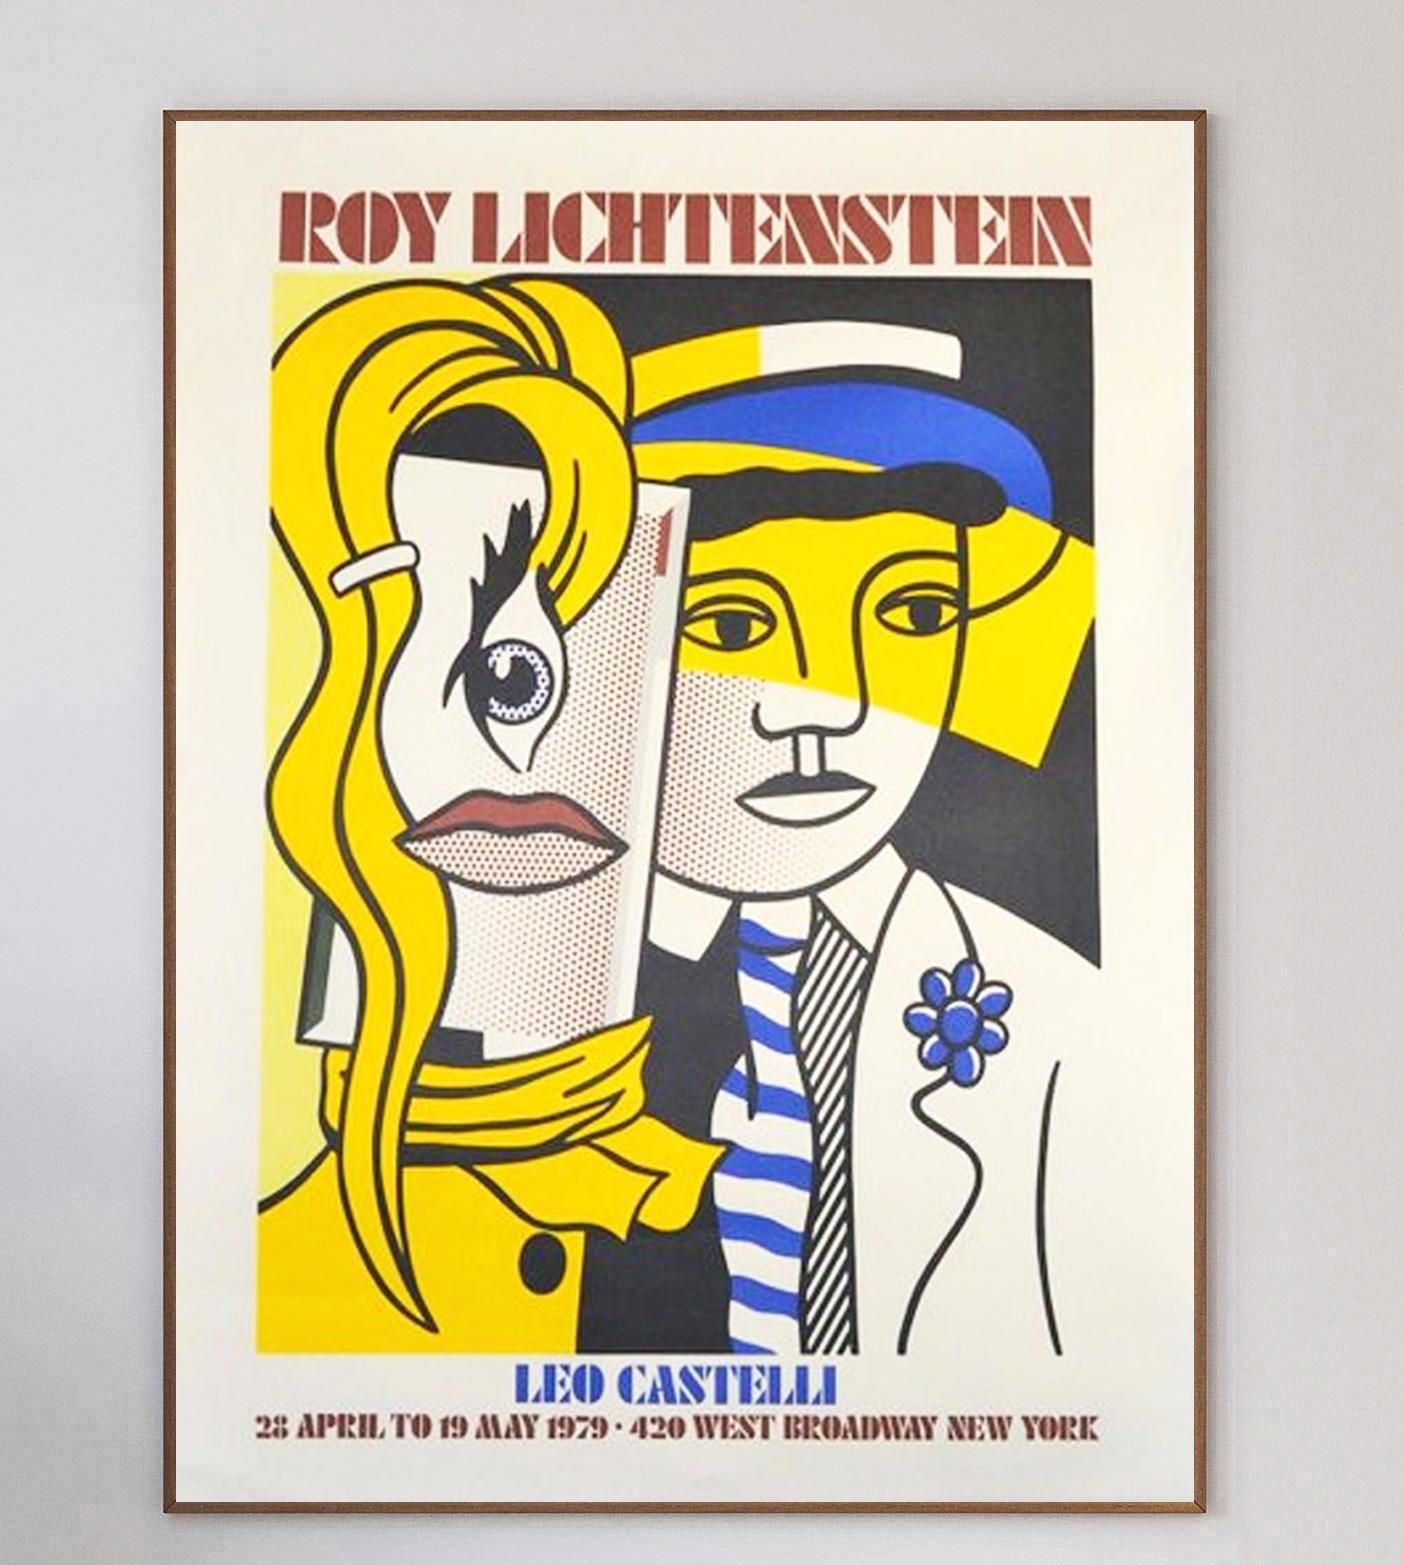 A beautiful and extremely rare piece, this poster is for Roy Lichtenstein's exhibition at the Leo Castelli Gallery on West Broadway in New York in 1979 and features Lichtenstein's artwork 